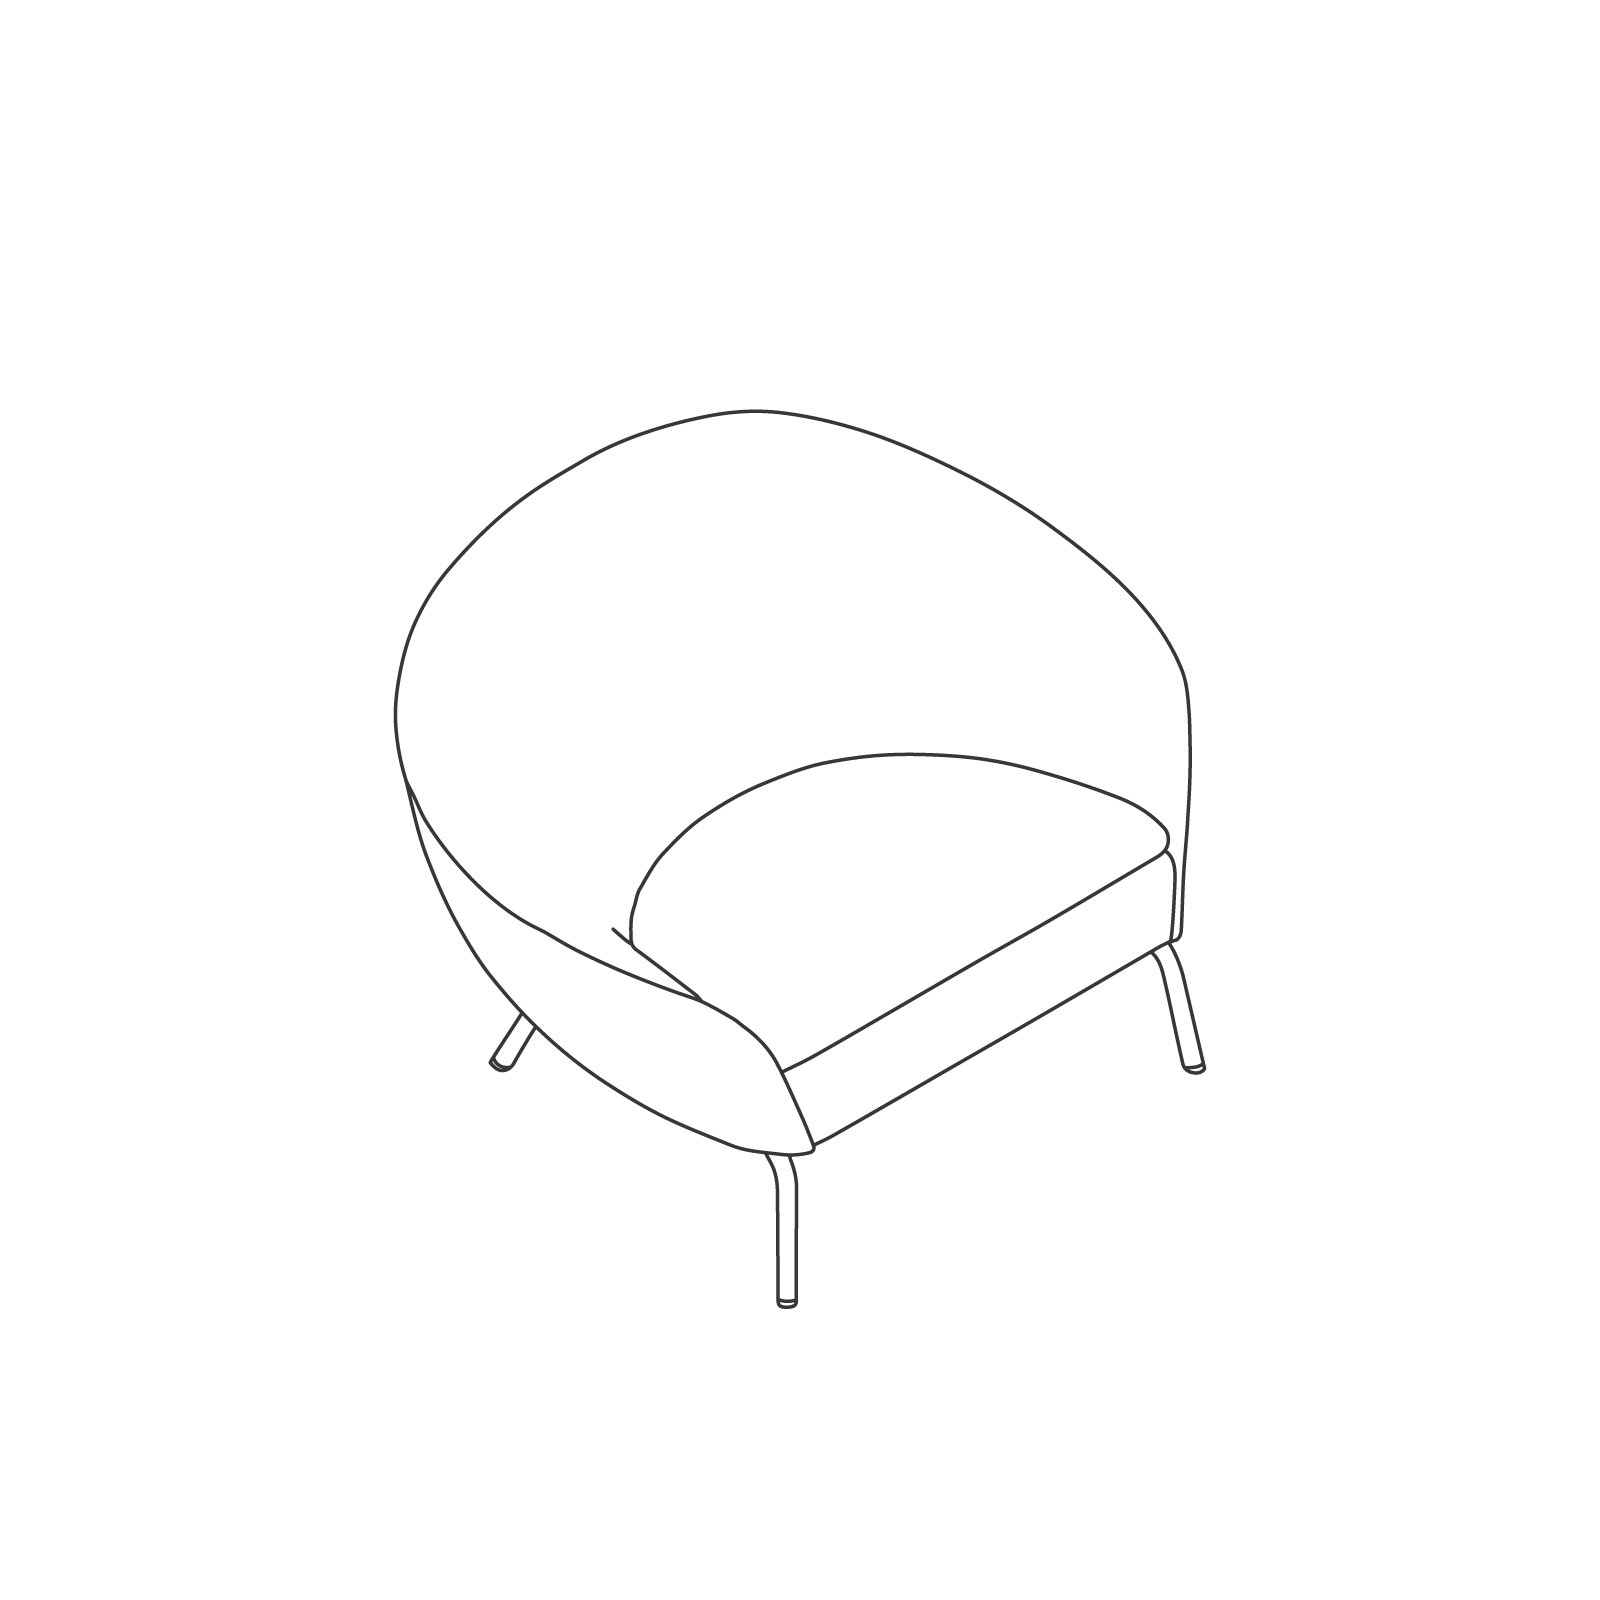 A line drawing - Ever Lounge Chair